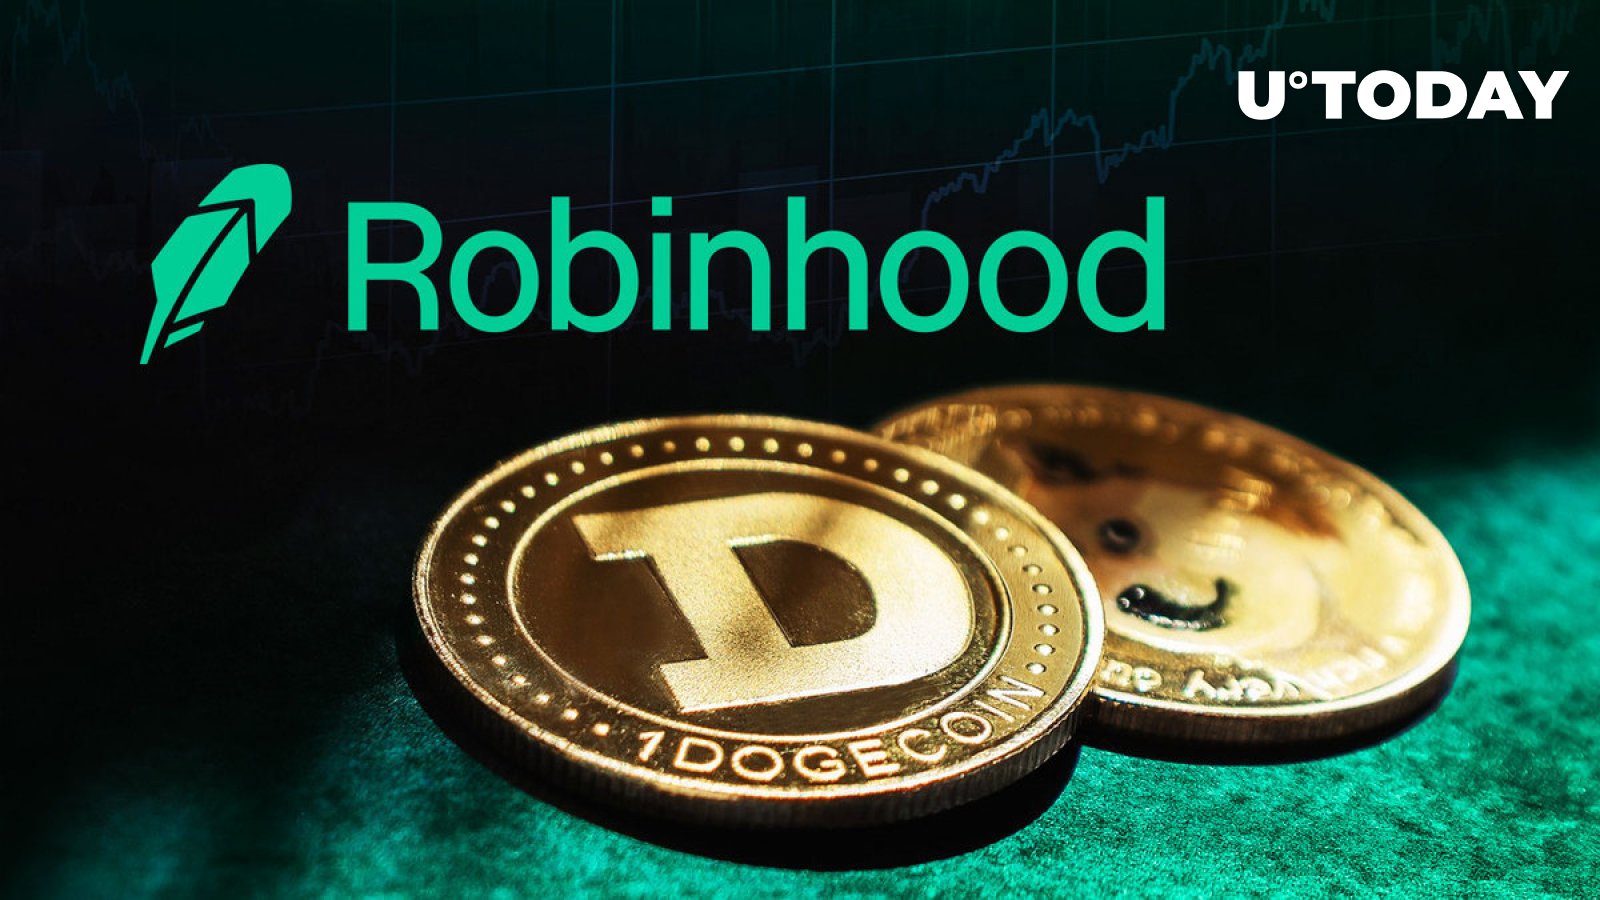 Dogecoin: Hundreds of Millions of DOGE Moved From Robinhood as Price Drops